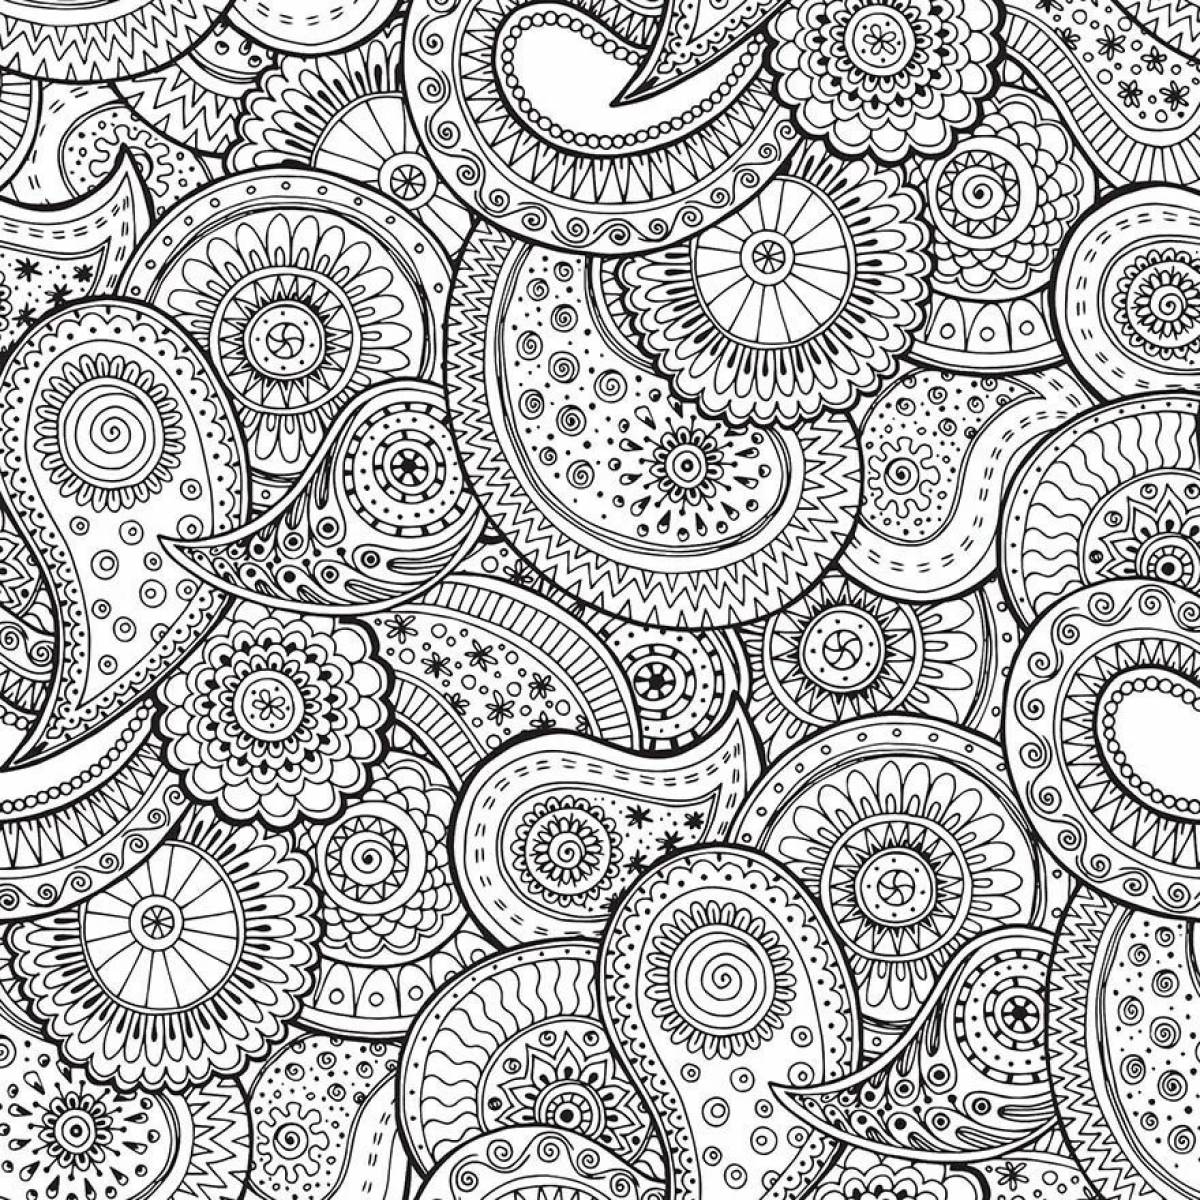 Coloring bright anti-stress patterns